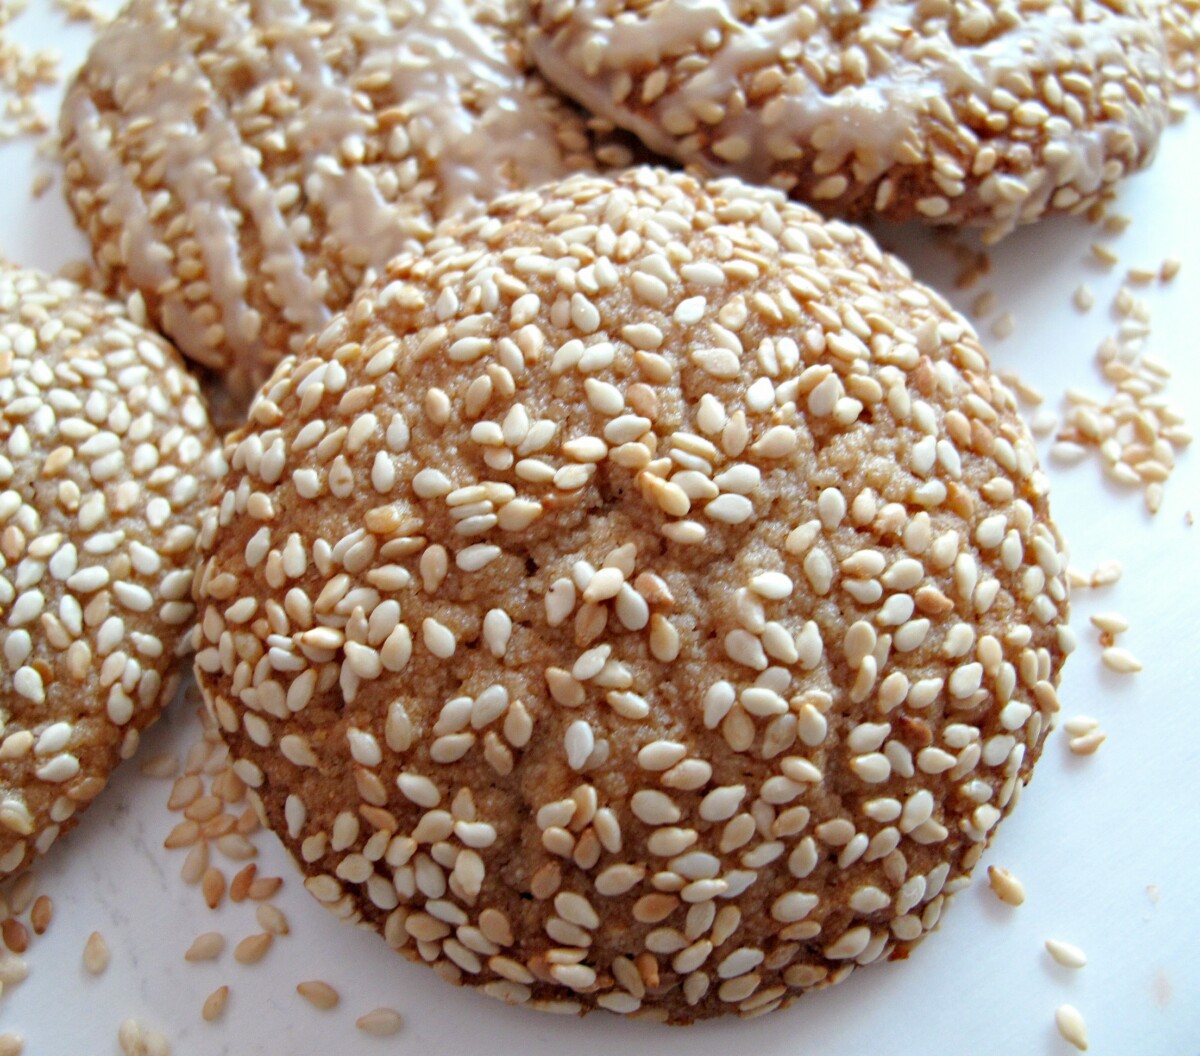 Closeup showing the sesame seed covered cookie.